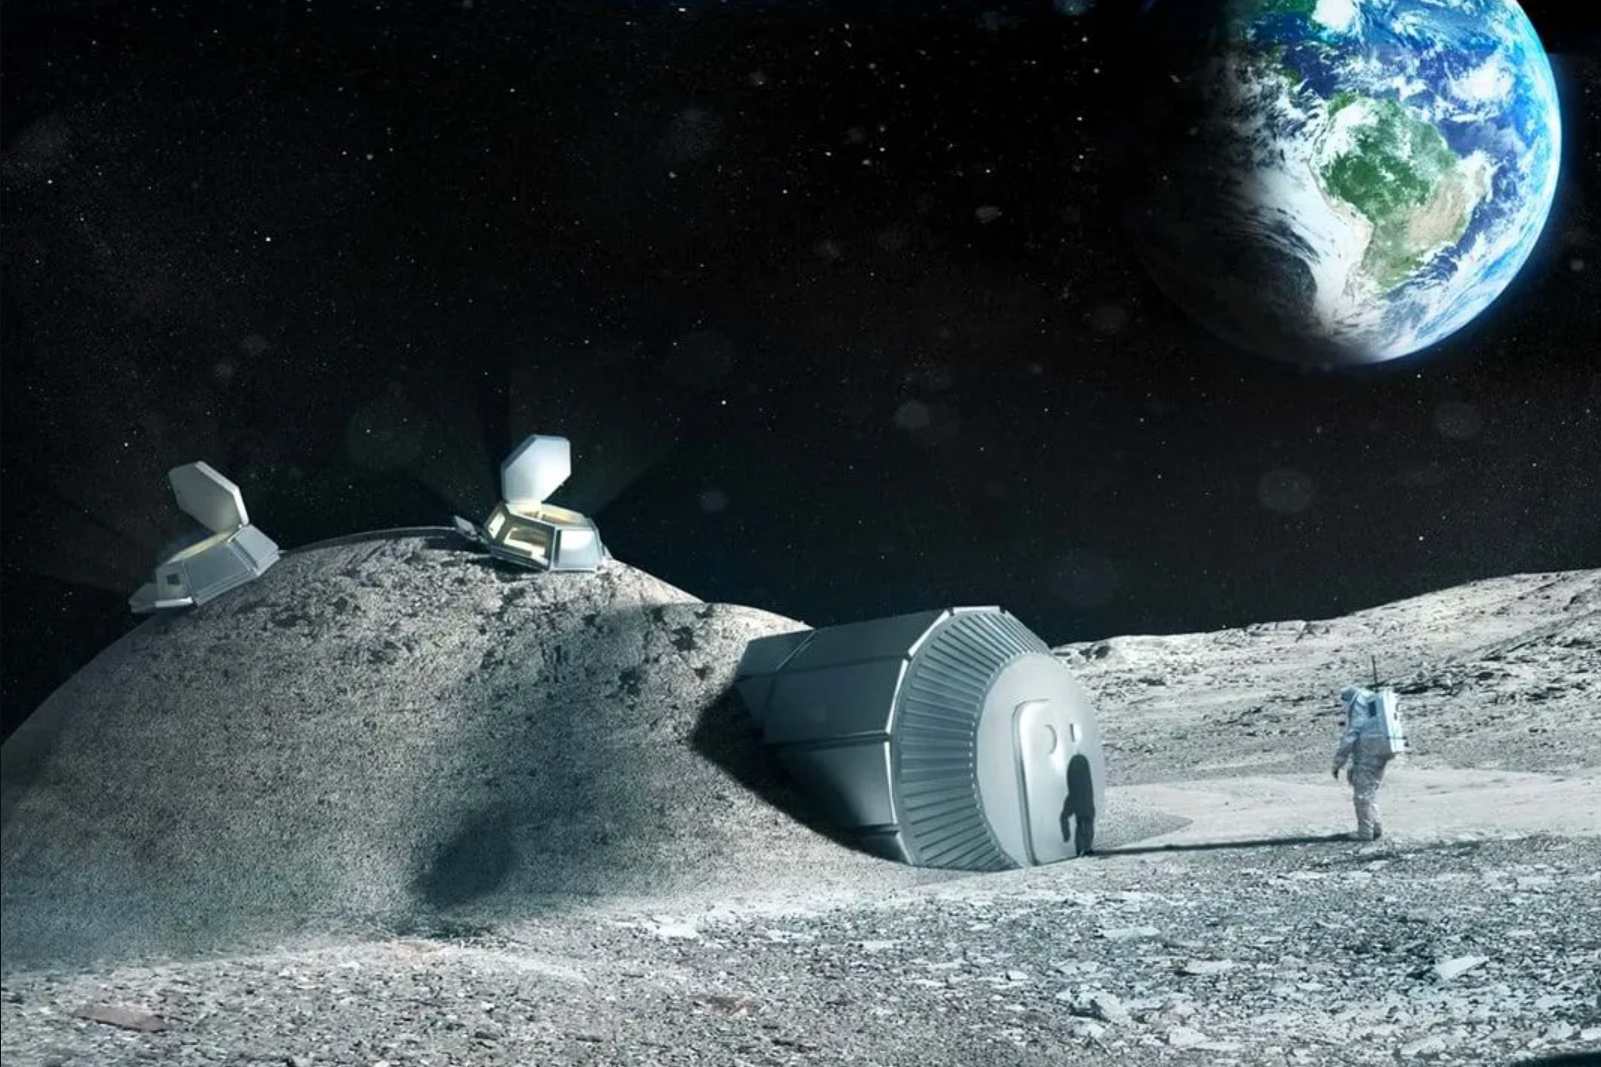 A concept for a lunar base that would allow humans to establish a permanent presence on the Moon